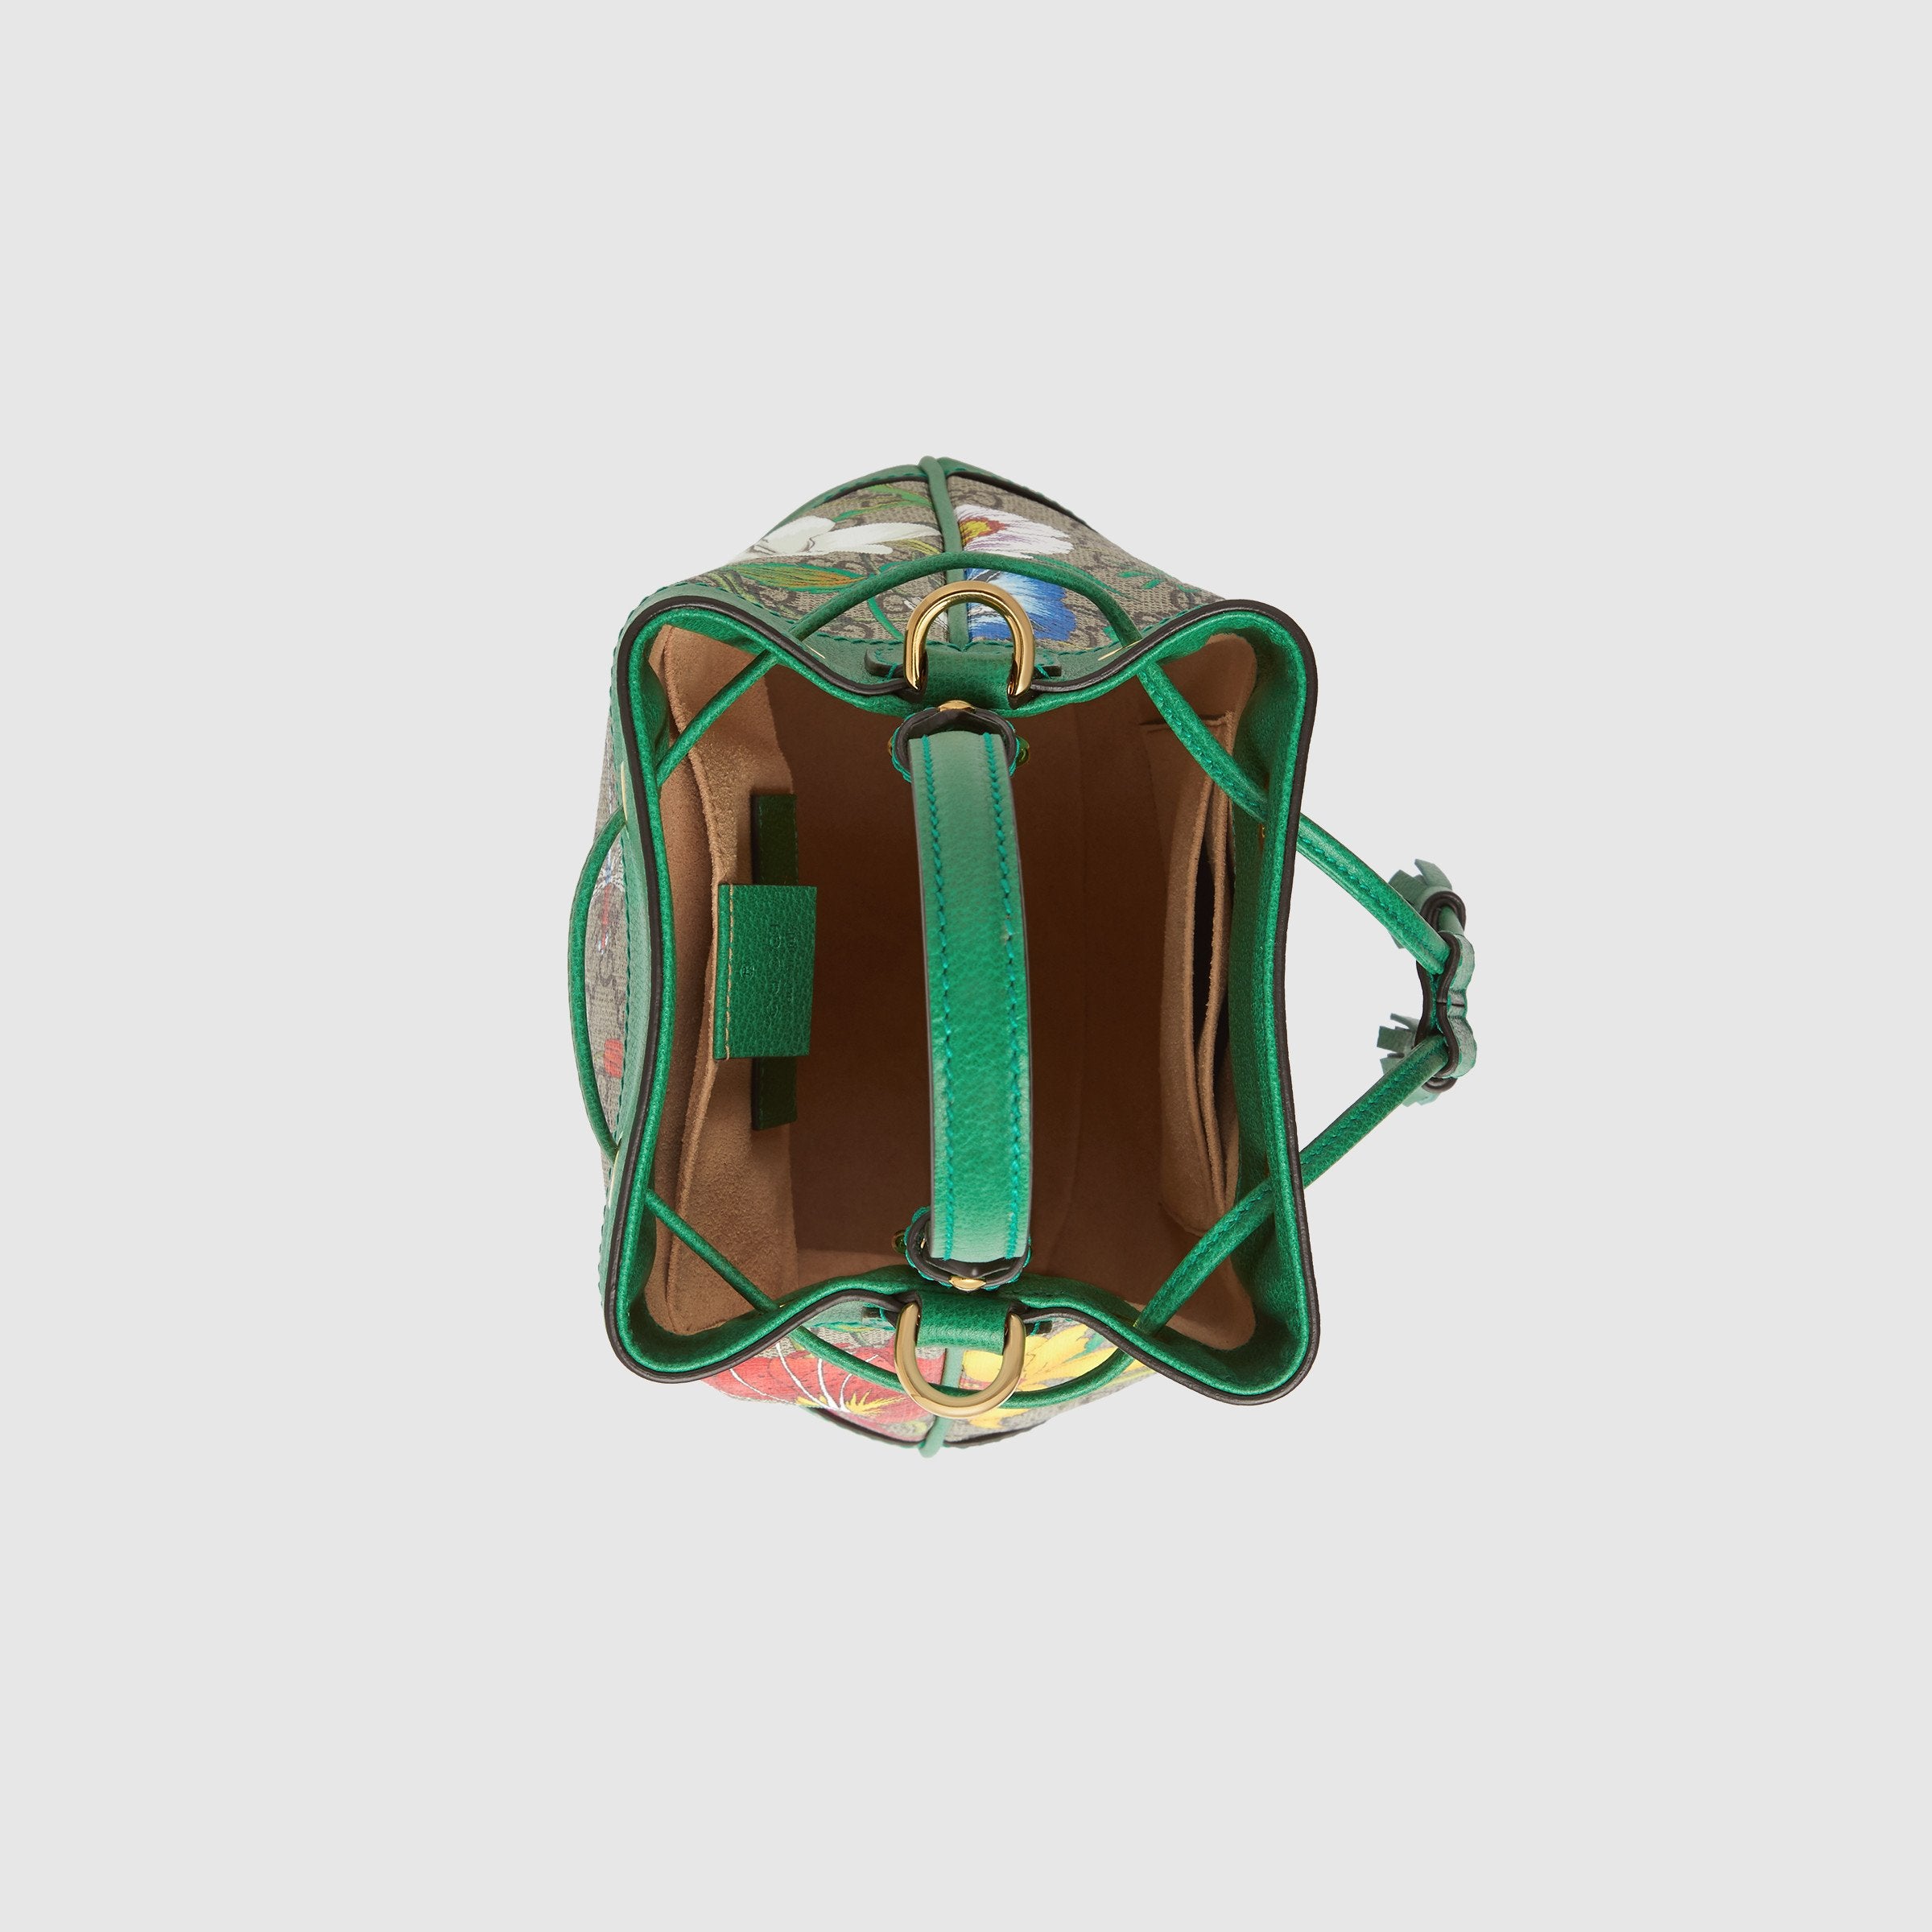 Gucci Ophidia GG Flora Small Bucket Bag Green